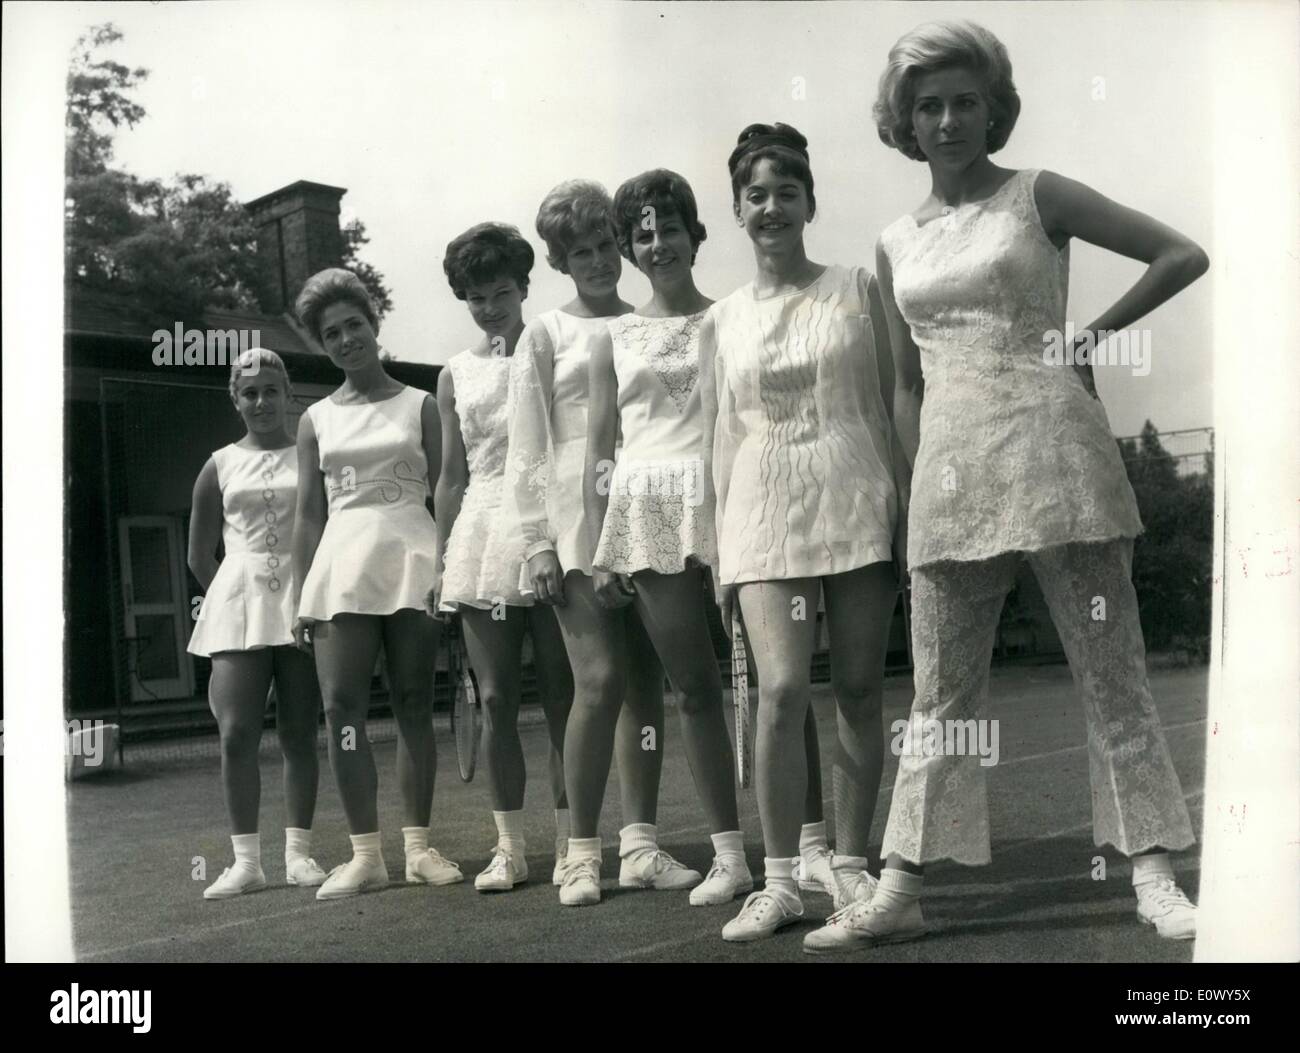 Jun. 06, 1964 - Pre-Wimbledon Reception At Hurlingham Club Seven Girls Show Their Wimbledon Fashions: The International Lawn Tennis Club's reception for Overseas players -prior to the opening of Wimbledon was held this afternoon at Hurlingham club. Photo Shows: some of the Tennis stars line up L to R. Miss Subiraz (Mexico) Miss Coranado (Spain) Miss Schultza, (W Germany) Miss Vanzyl (S Africa) Miss Buend (Brazil) Miss Butler (U.S.) Miss Pericoli (Italy) Stock Photo